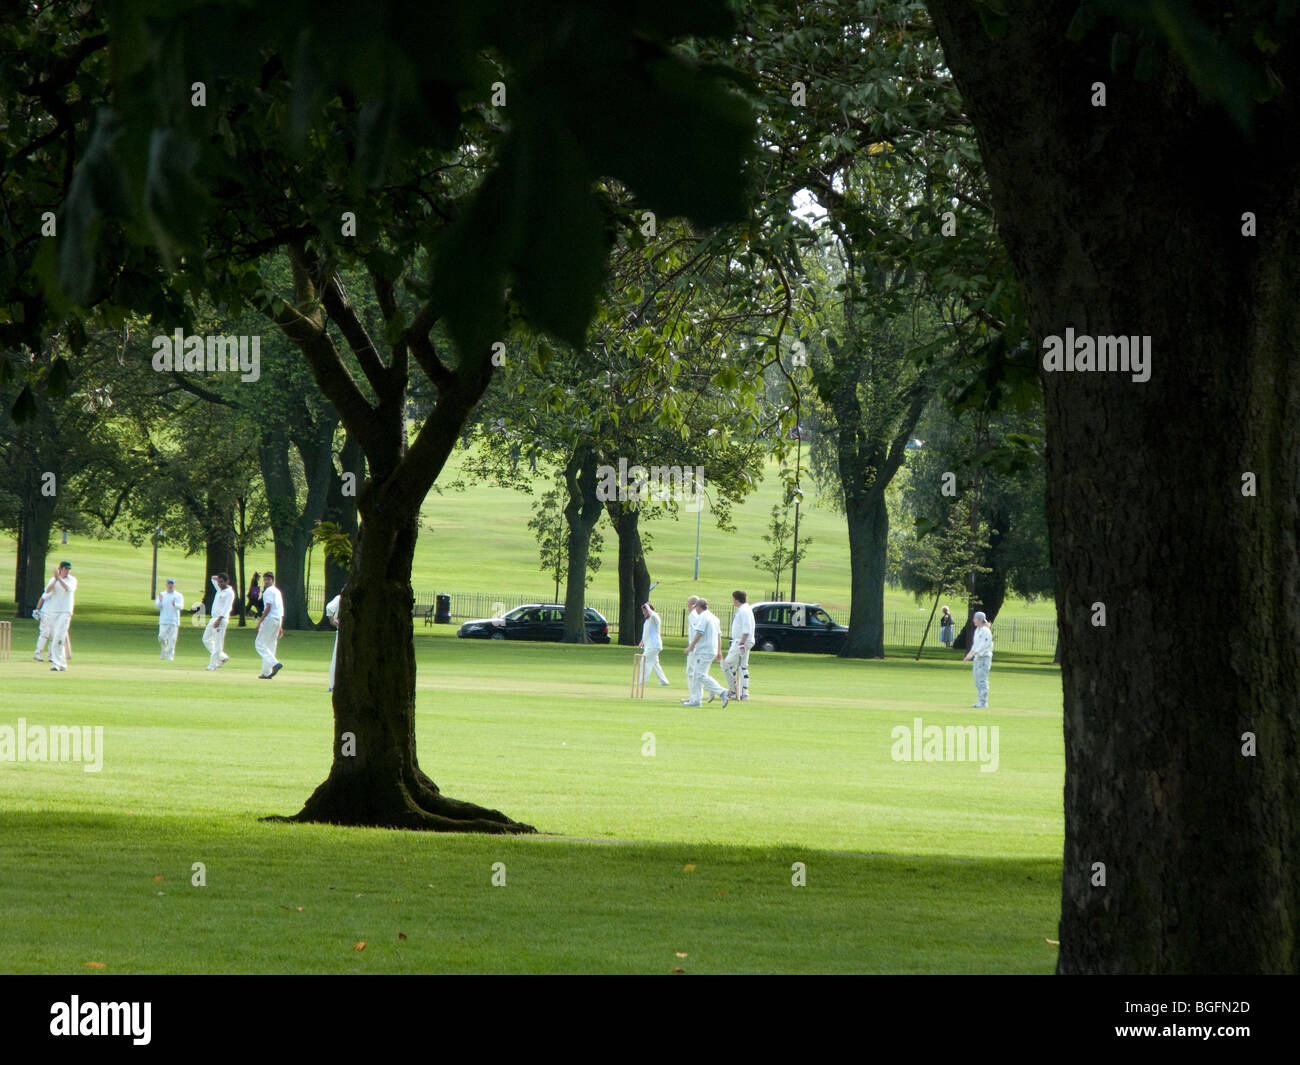 Cricket match in the park during summer Stock Photo